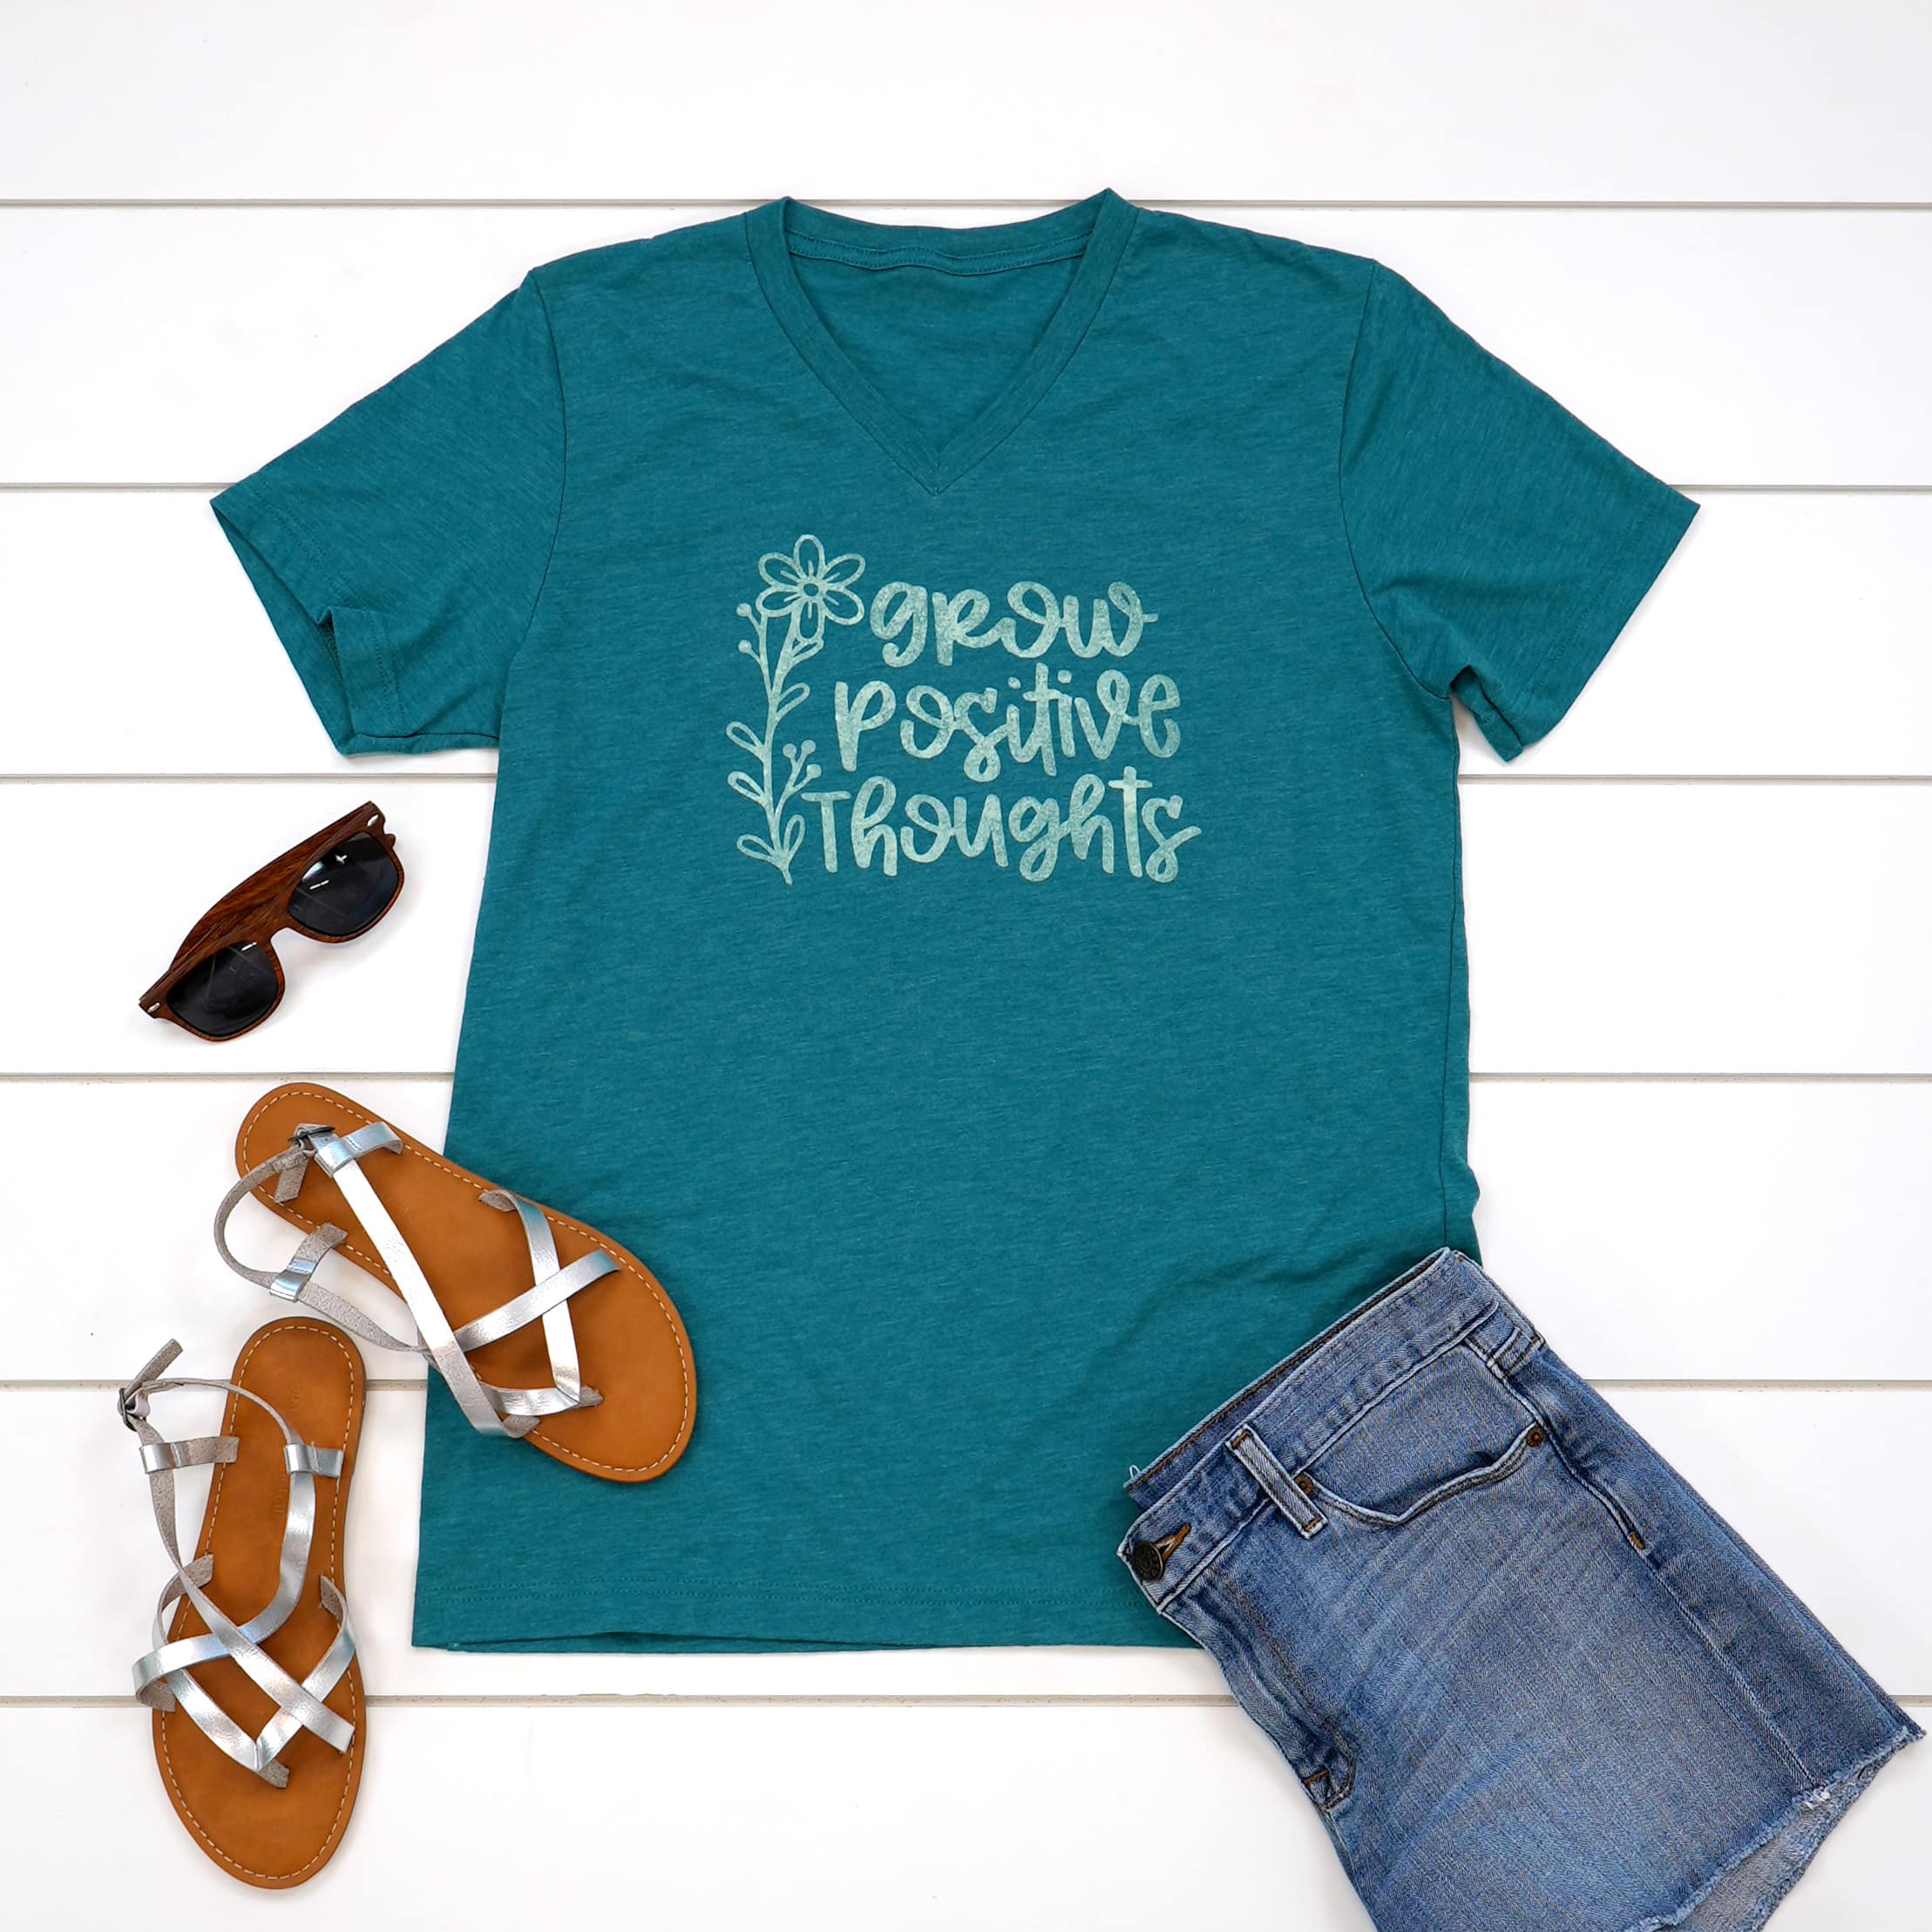 Teal "Grow Positive Thoughts" shirt with outfit in flat lay on white wood background